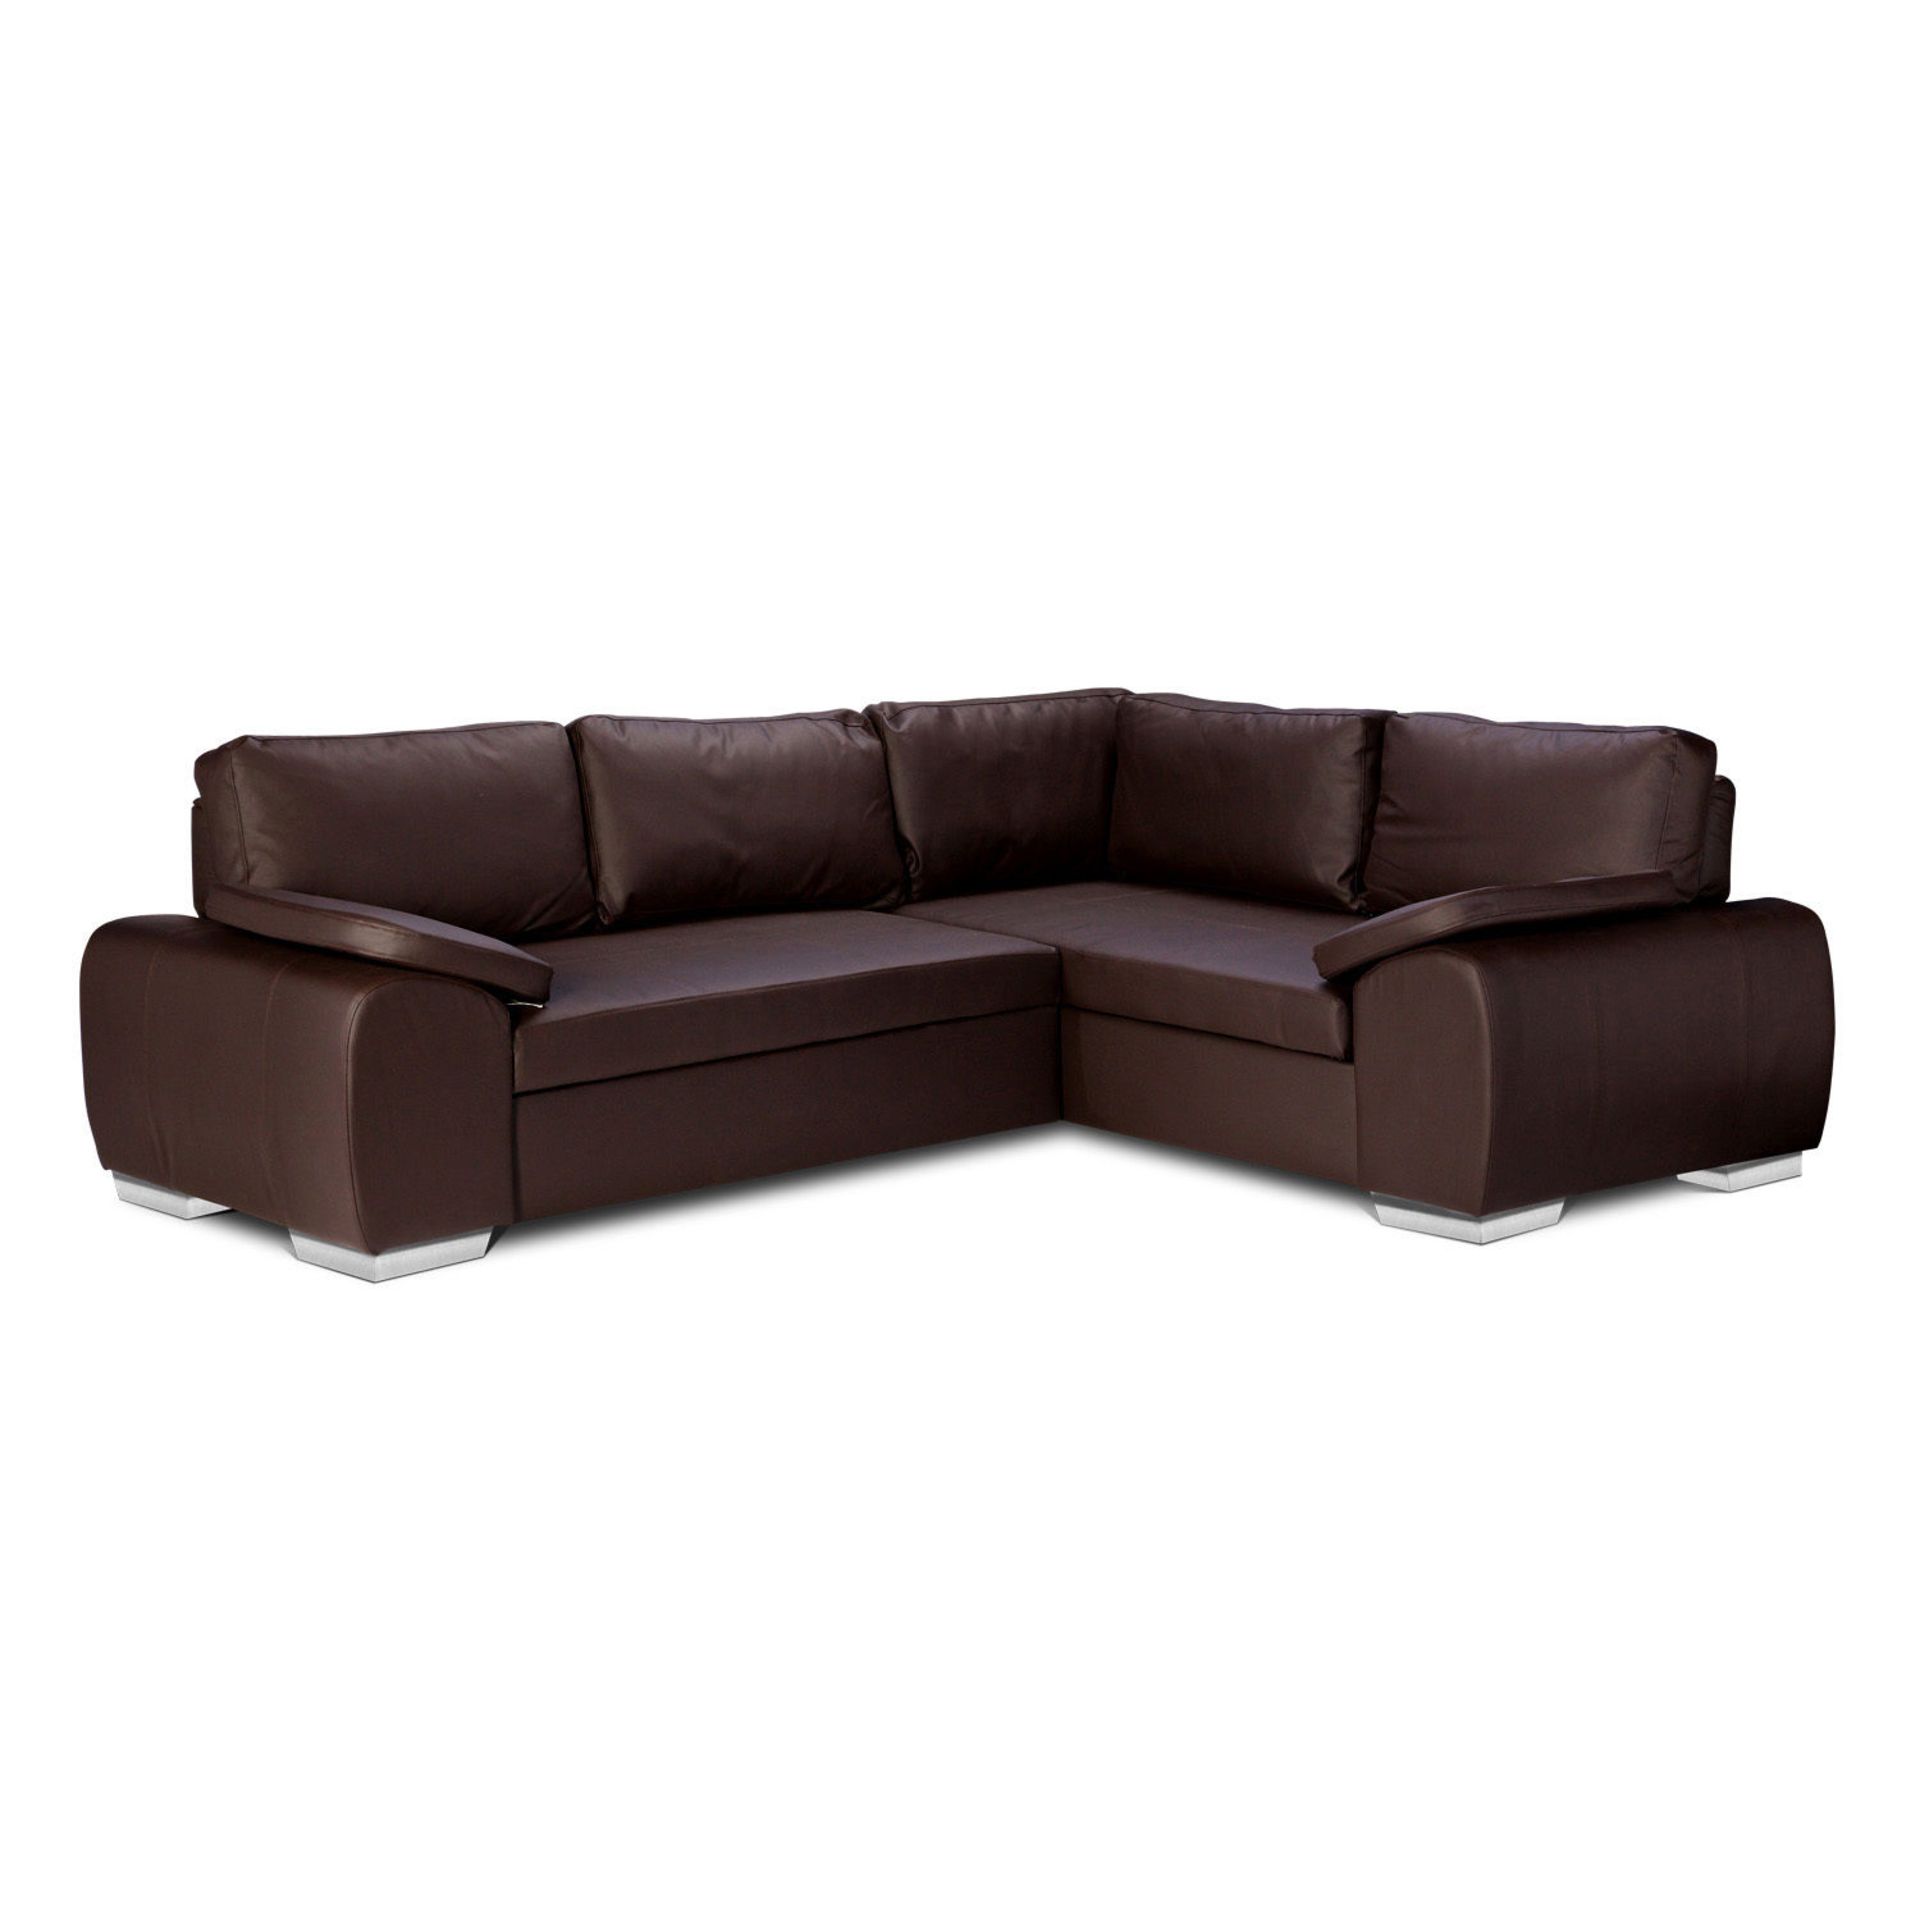 Brand new boxed direct from the manufacturers enzo brown leather corner sofa bed